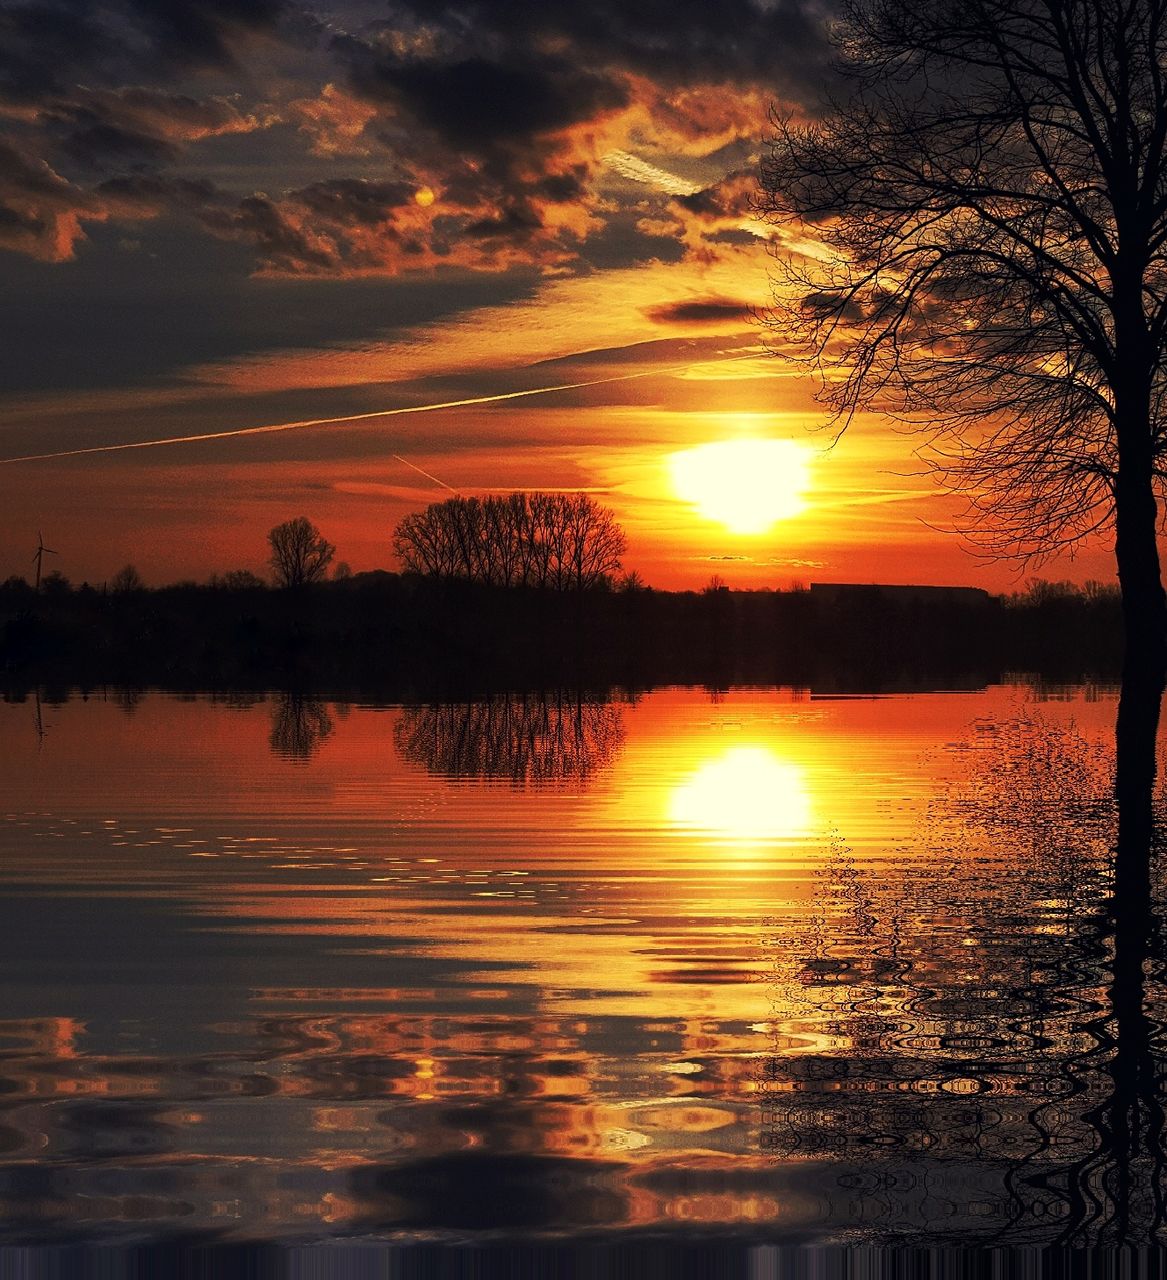 sunset, reflection, beauty in nature, nature, scenics, tranquil scene, orange color, tranquility, water, silhouette, sky, cloud - sky, idyllic, dramatic sky, outdoors, sun, no people, lake, tree, awe